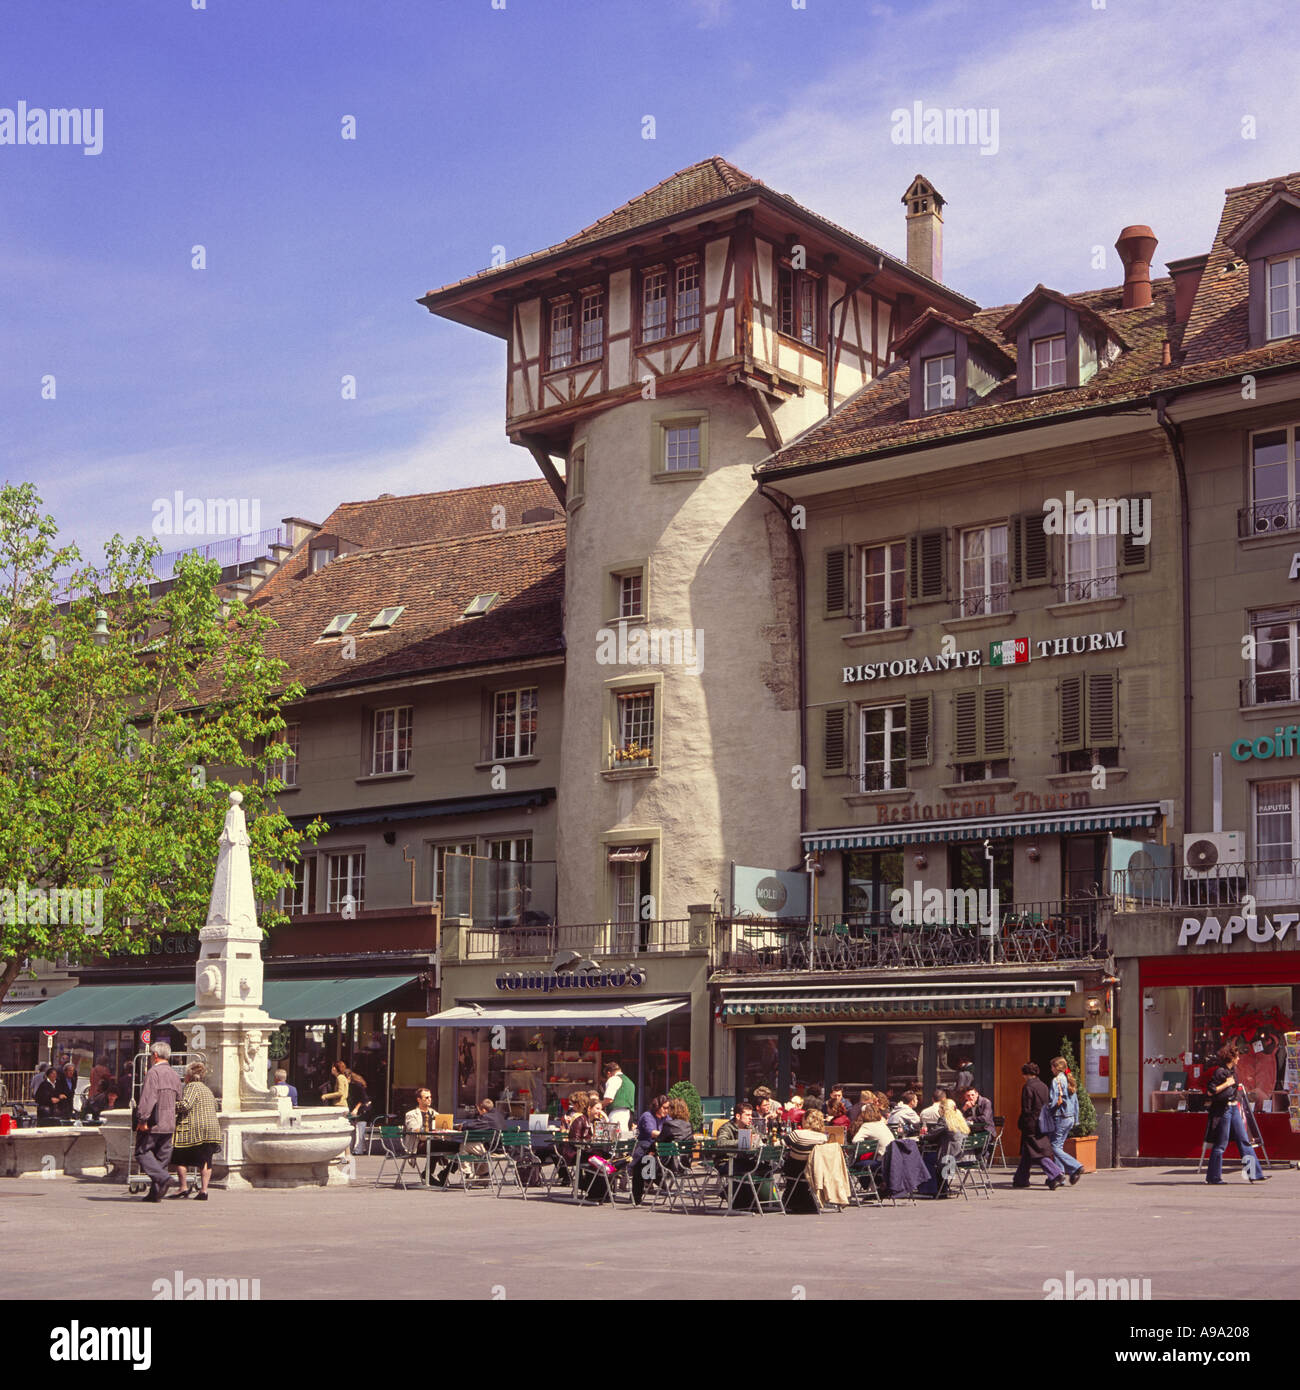 People sitting outside at a café on the sidewalk of Waisenhausplatz in the city center of Bern Switzerland Stock Photo